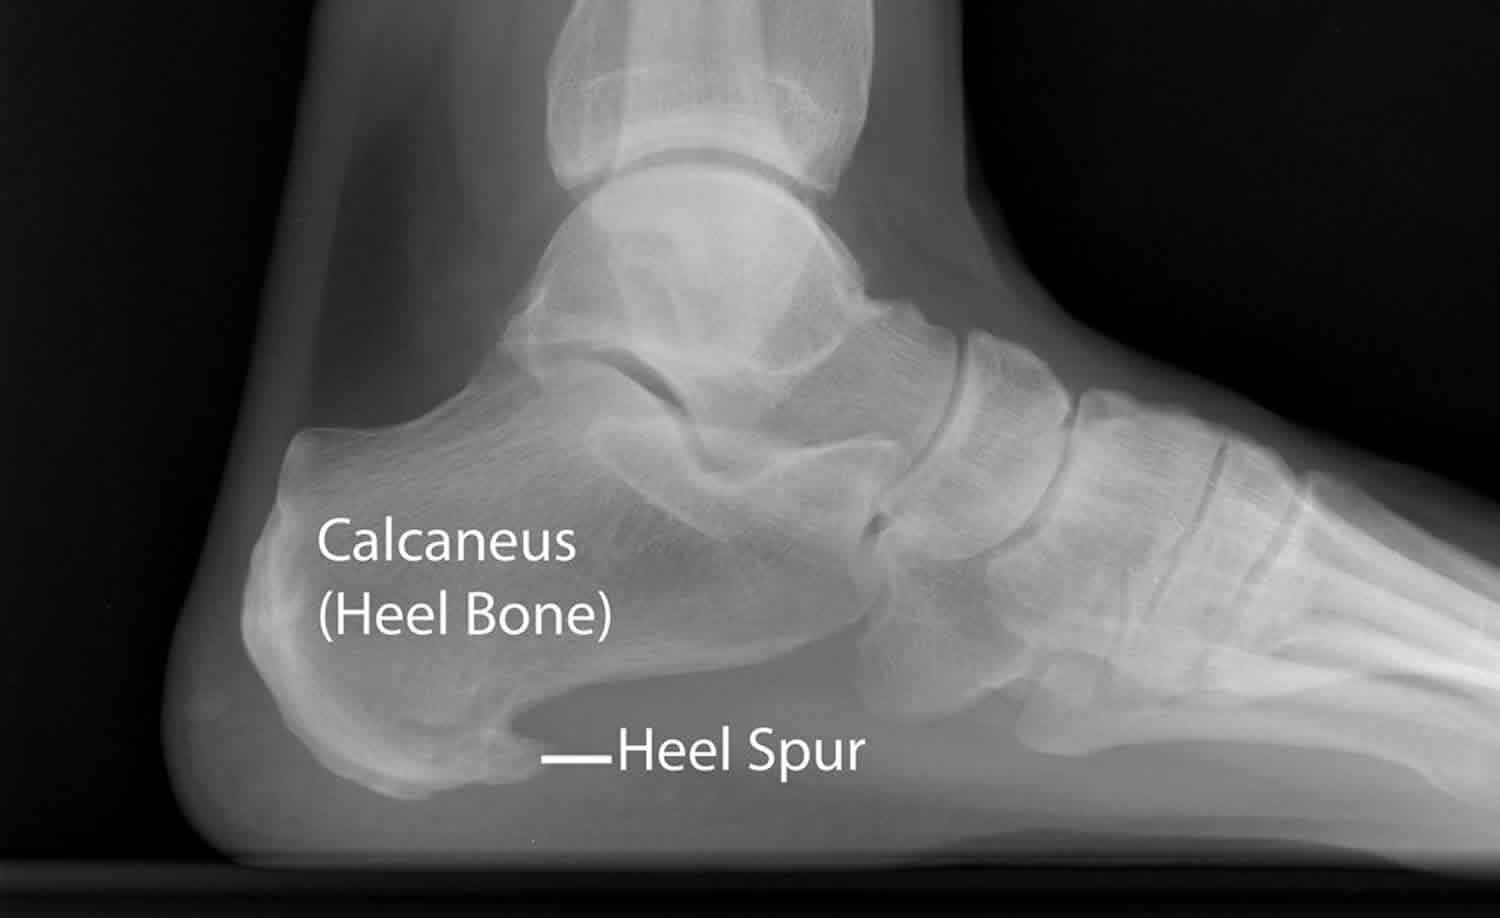 Pathological ankle fracture due to brown tumour: atypical presentation of  low serum vitamin D with normal parathyroid hormone and bone profile | BMJ  Case Reports